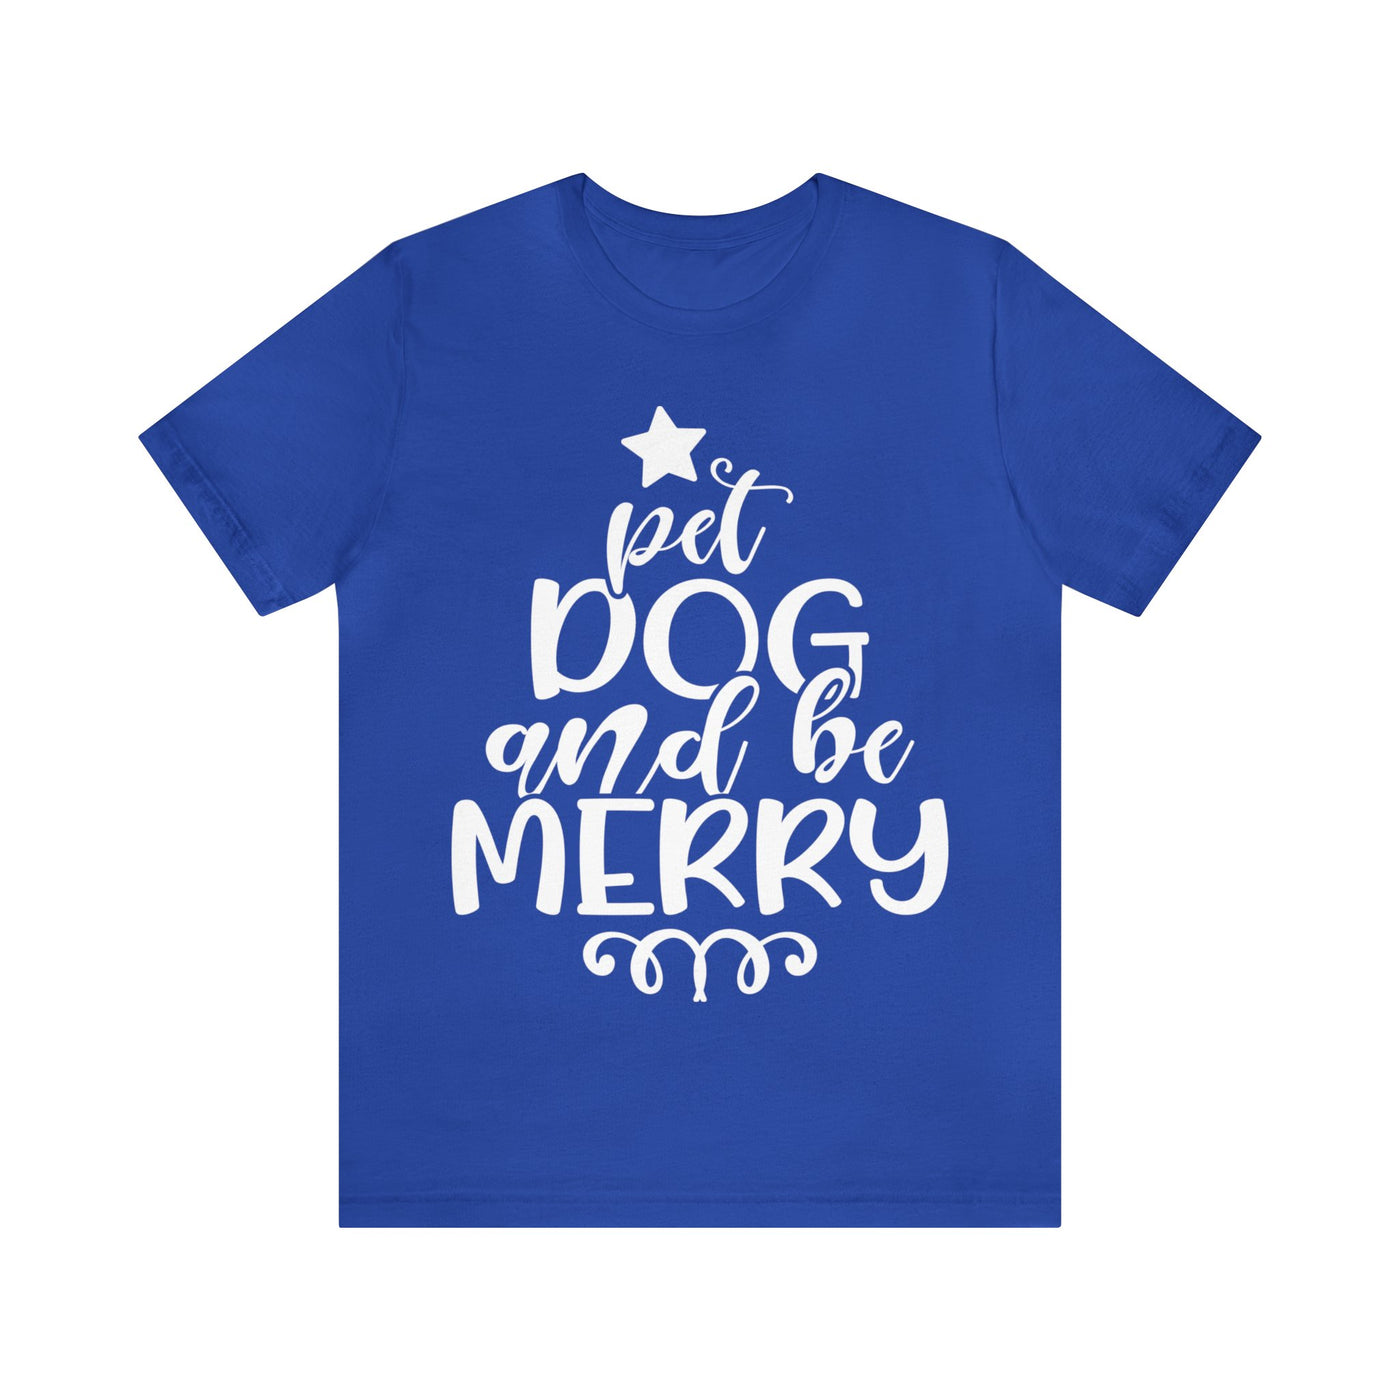 Pet Dog and be Merry T-Shirt